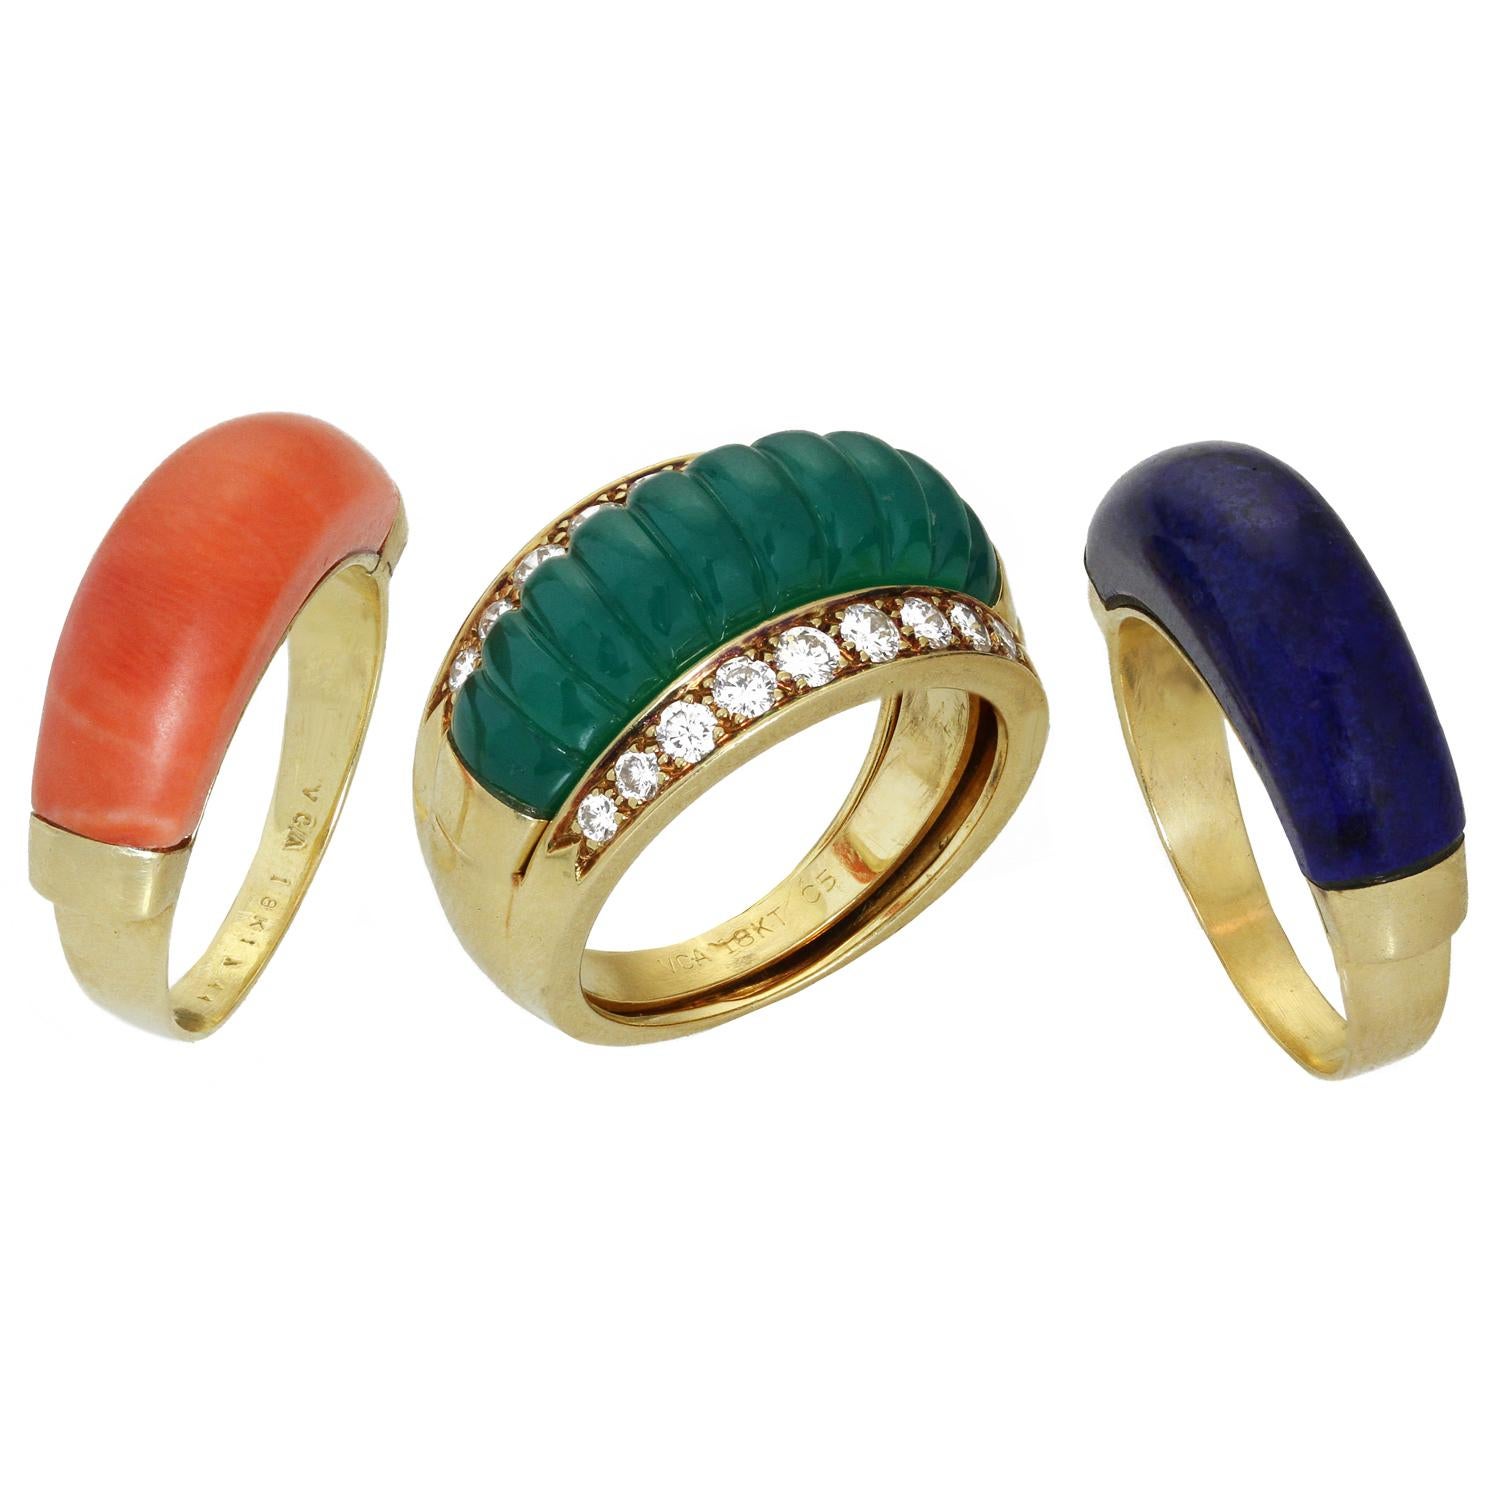 This gorgeous and rare Van Cleef & Arpels interchangeable ring set features carved green chalcedony, lapis lazuli, and coral gemstones set in 18k yellow gold and accented with brilliant-cut round diamonds that adorn the framing ring. Made in France